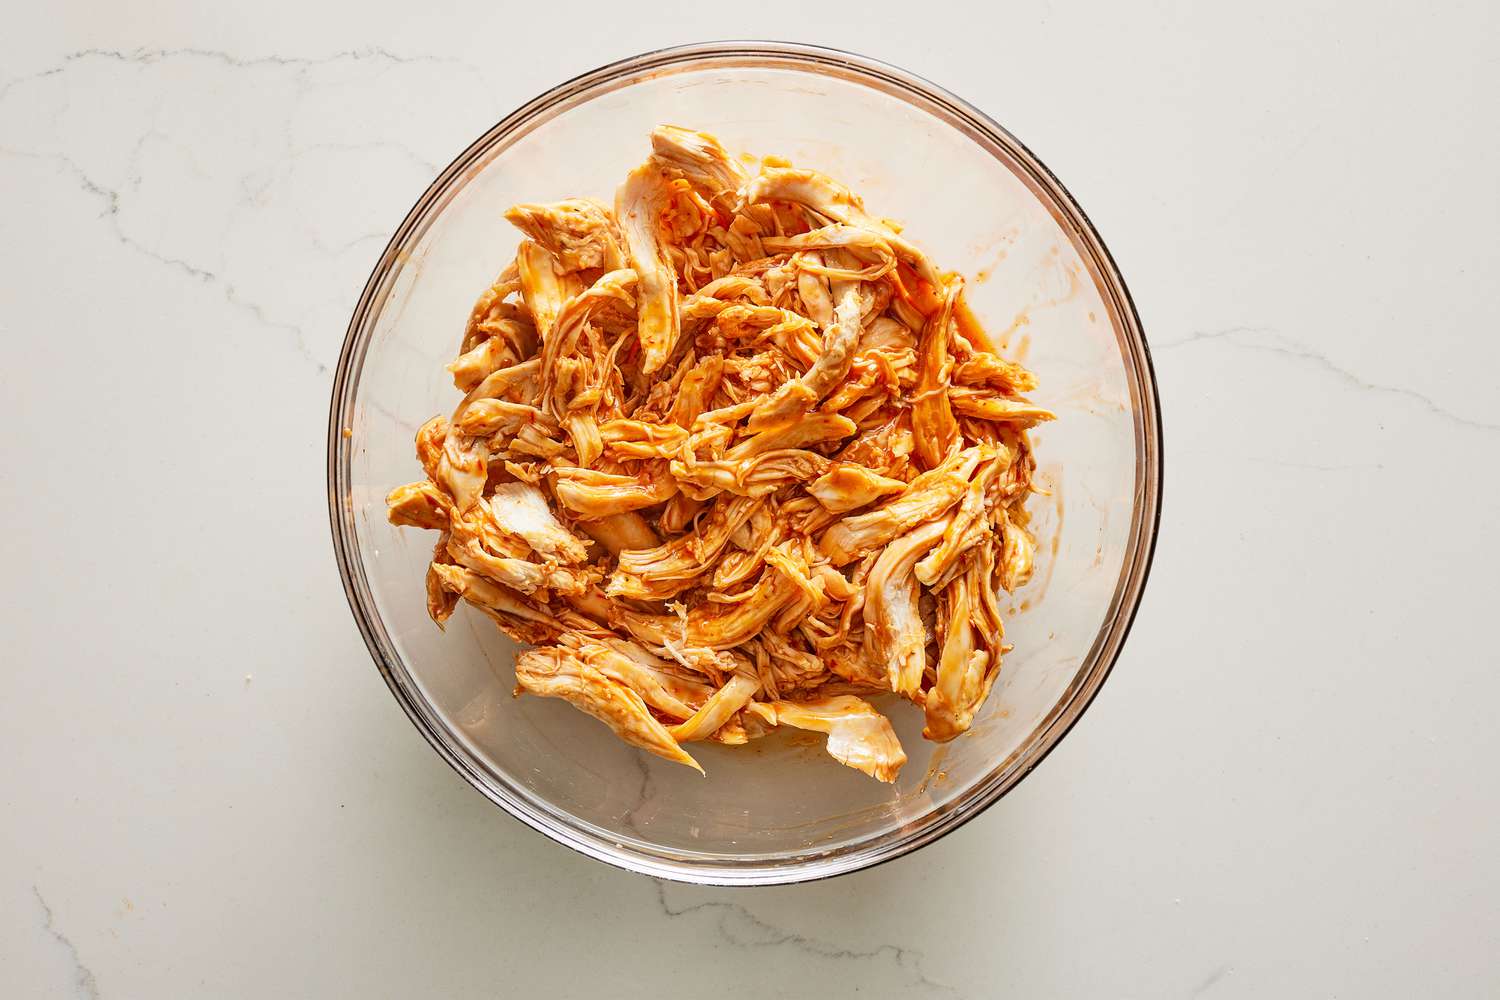 A bowl of shredded chicken tossed in honey-chile sauce